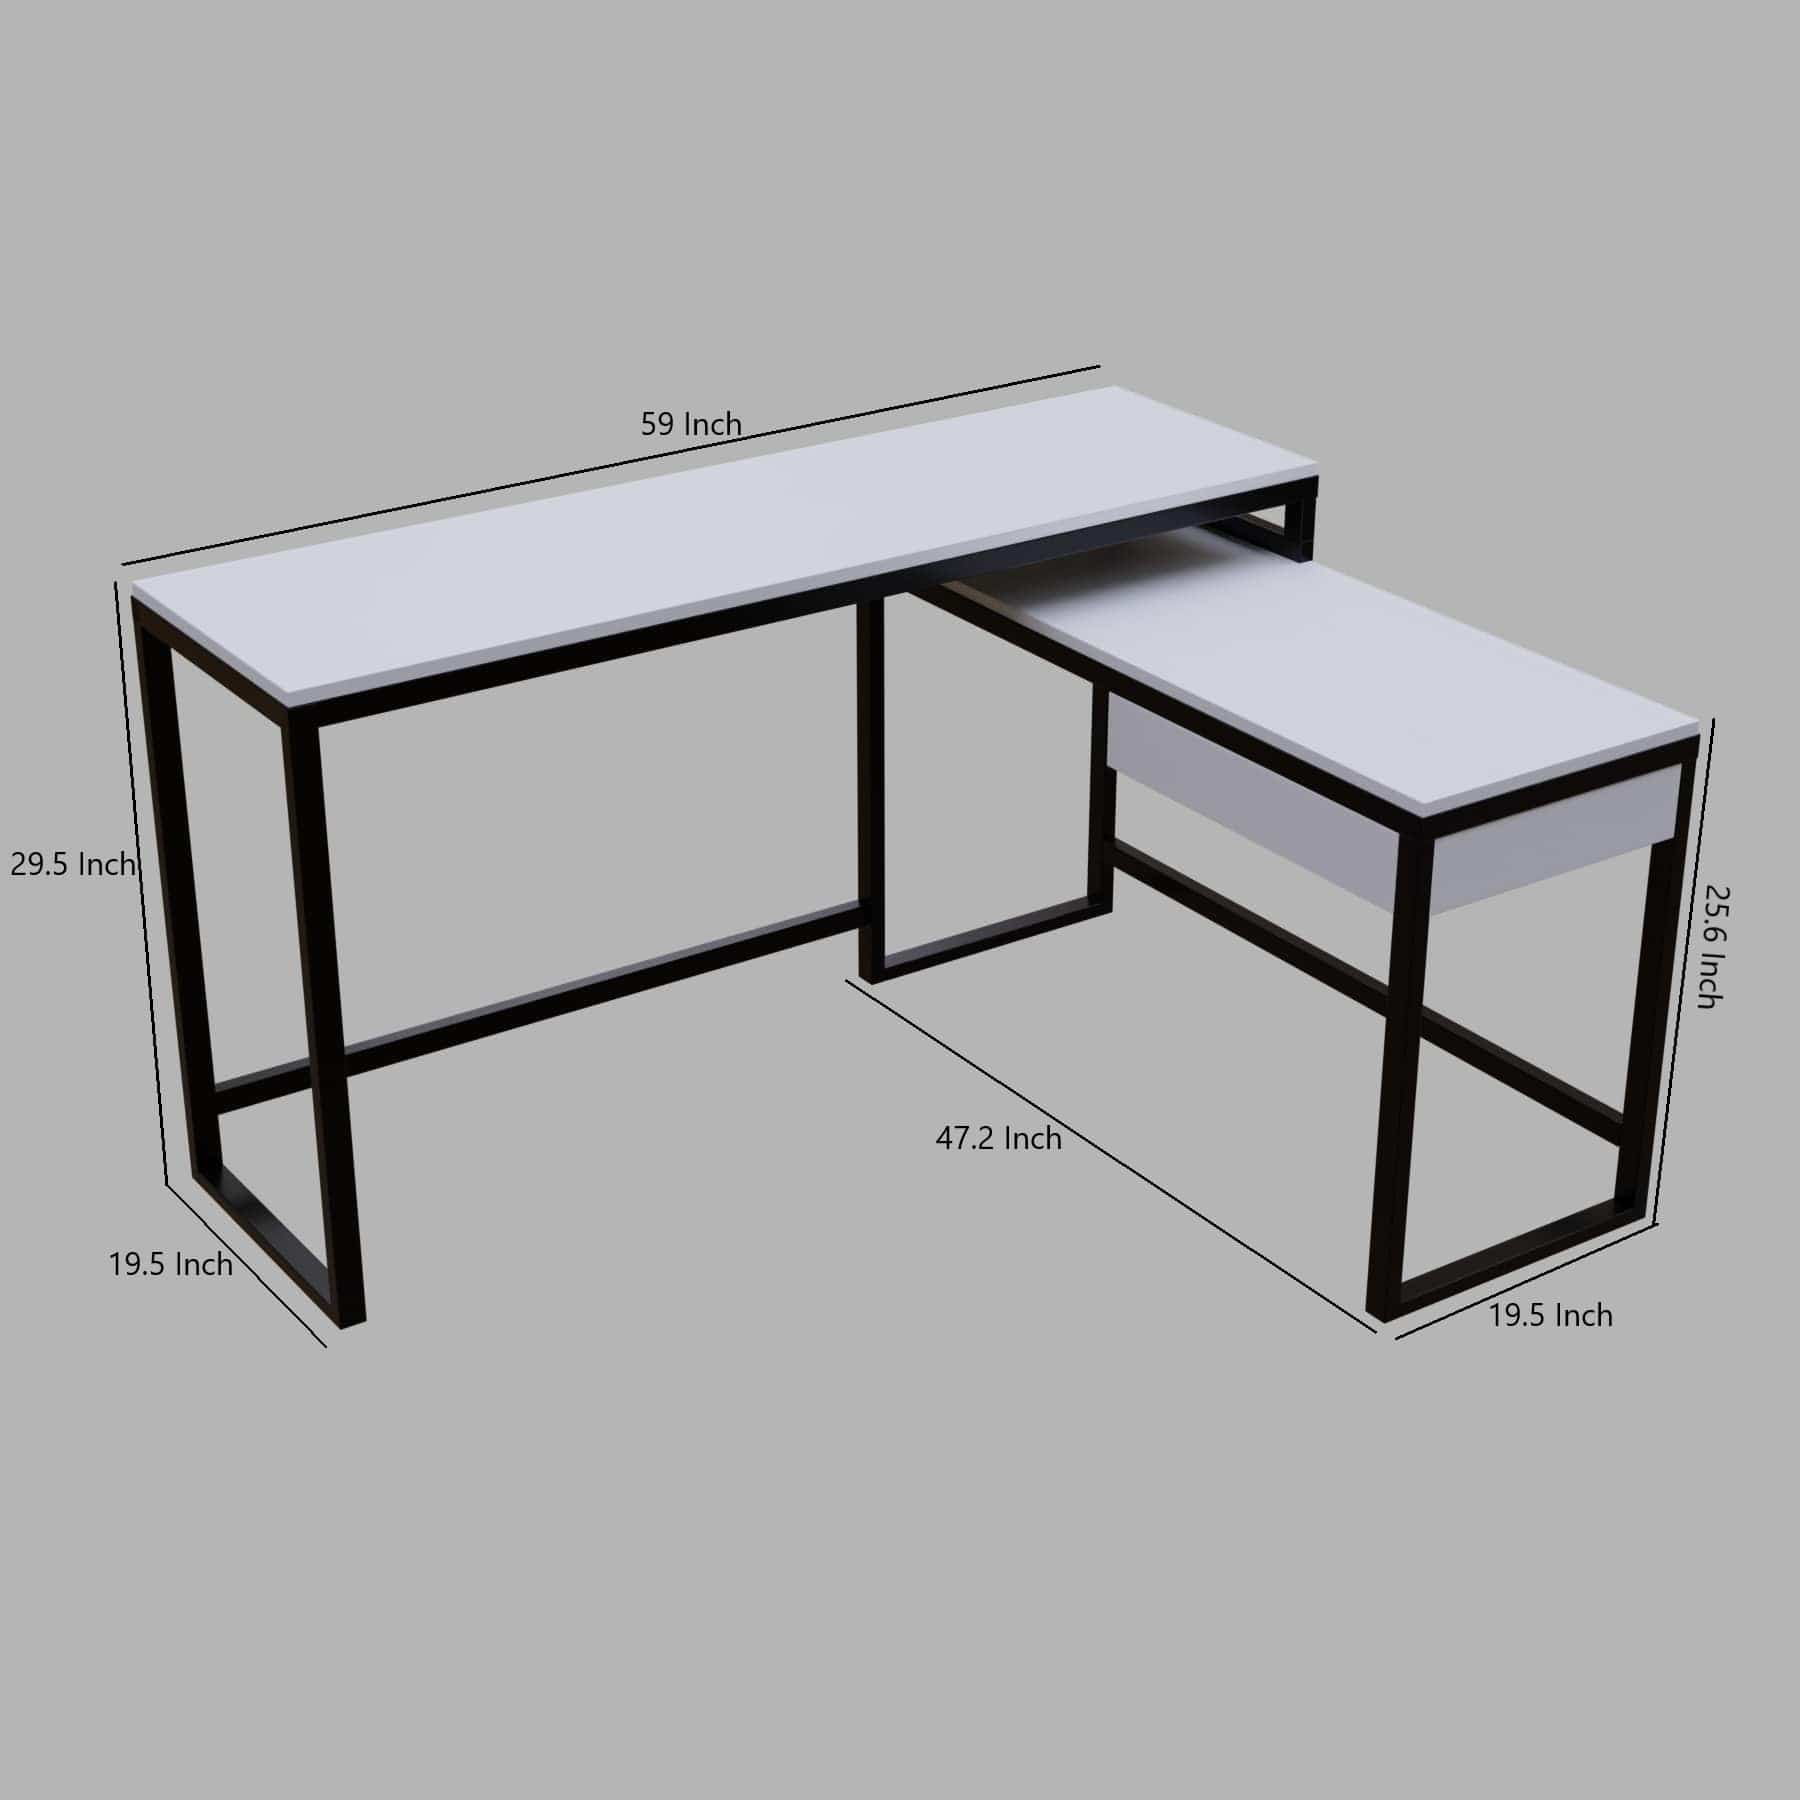 Enkele L Shaped Study Table with Storage Design in White Color